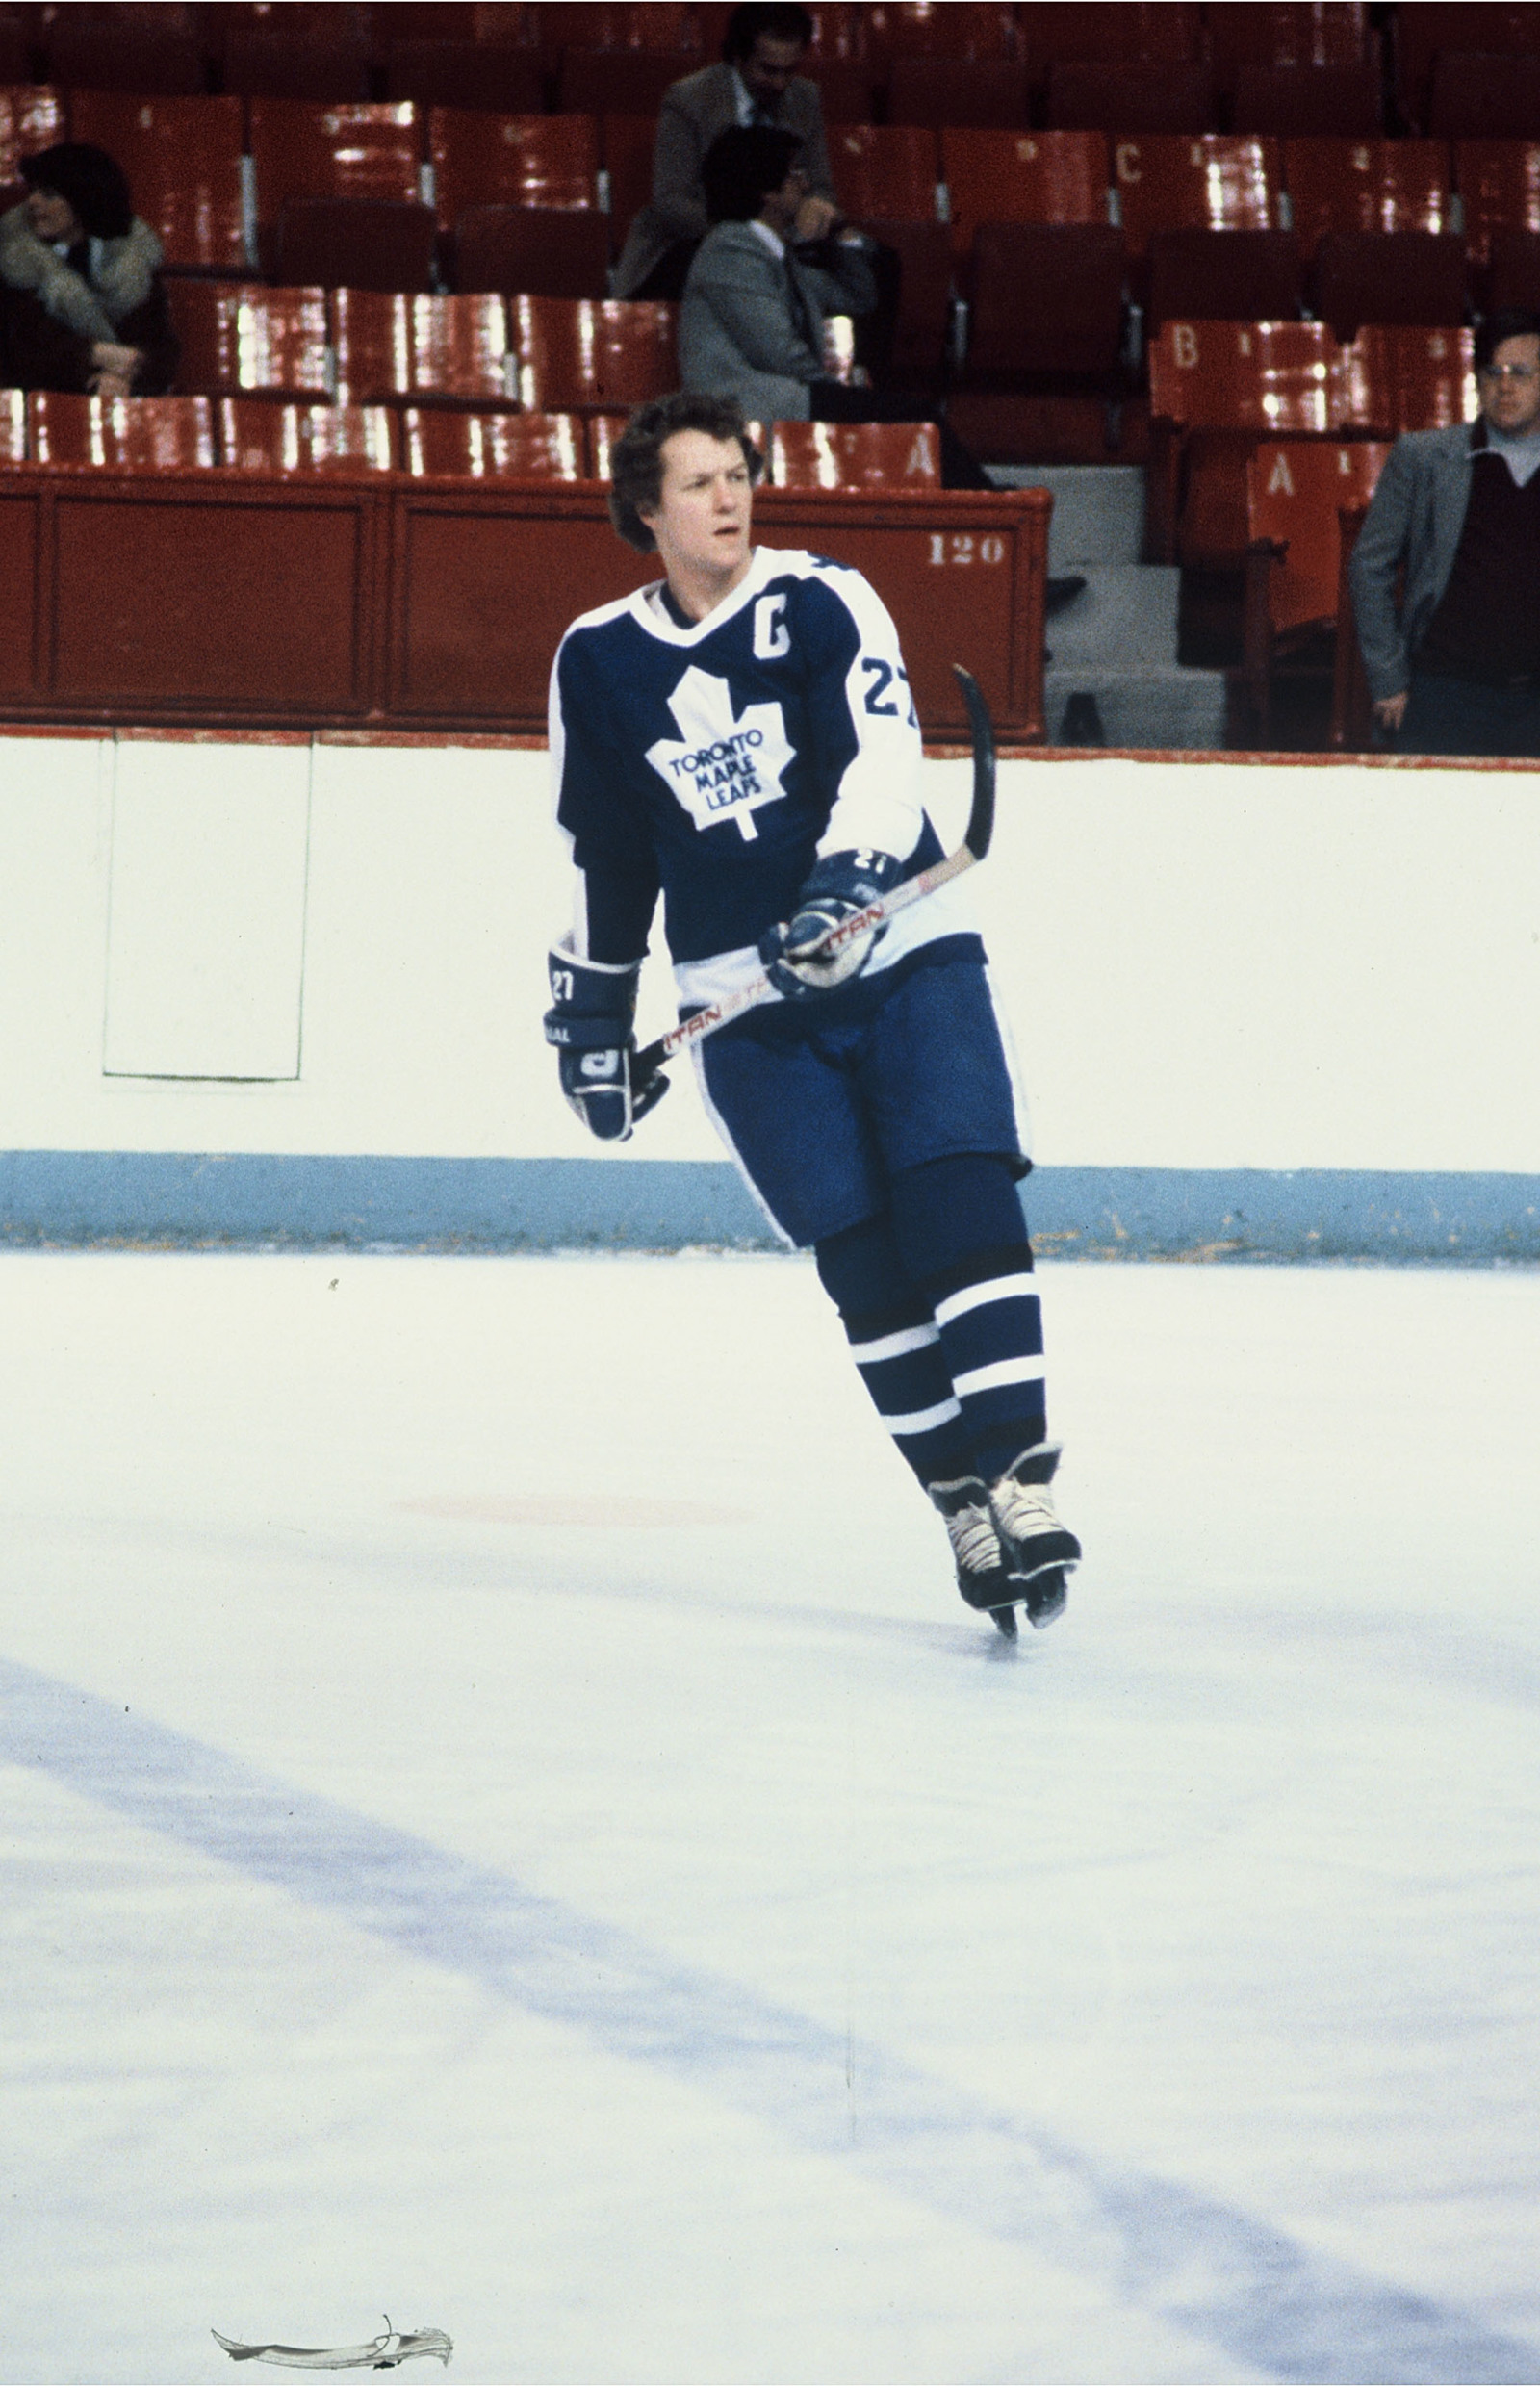 Forty years since Leafs' star Sittler's record 10-point game